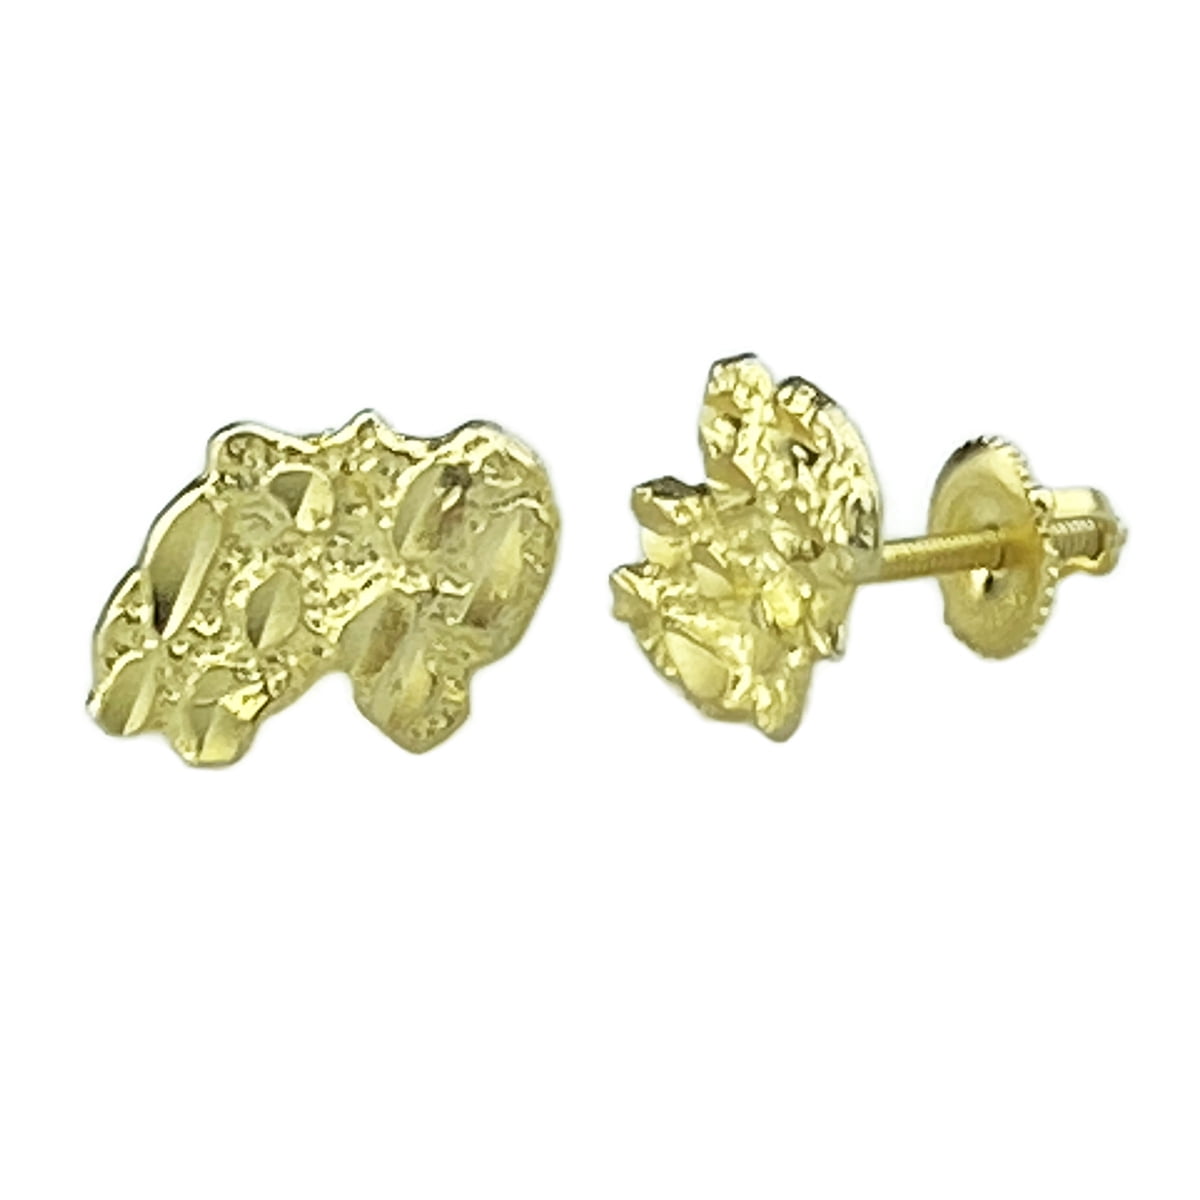 Mens 18K Yellow Gold Finish Large Nugget 925 Sterling Silver Stud Earrings